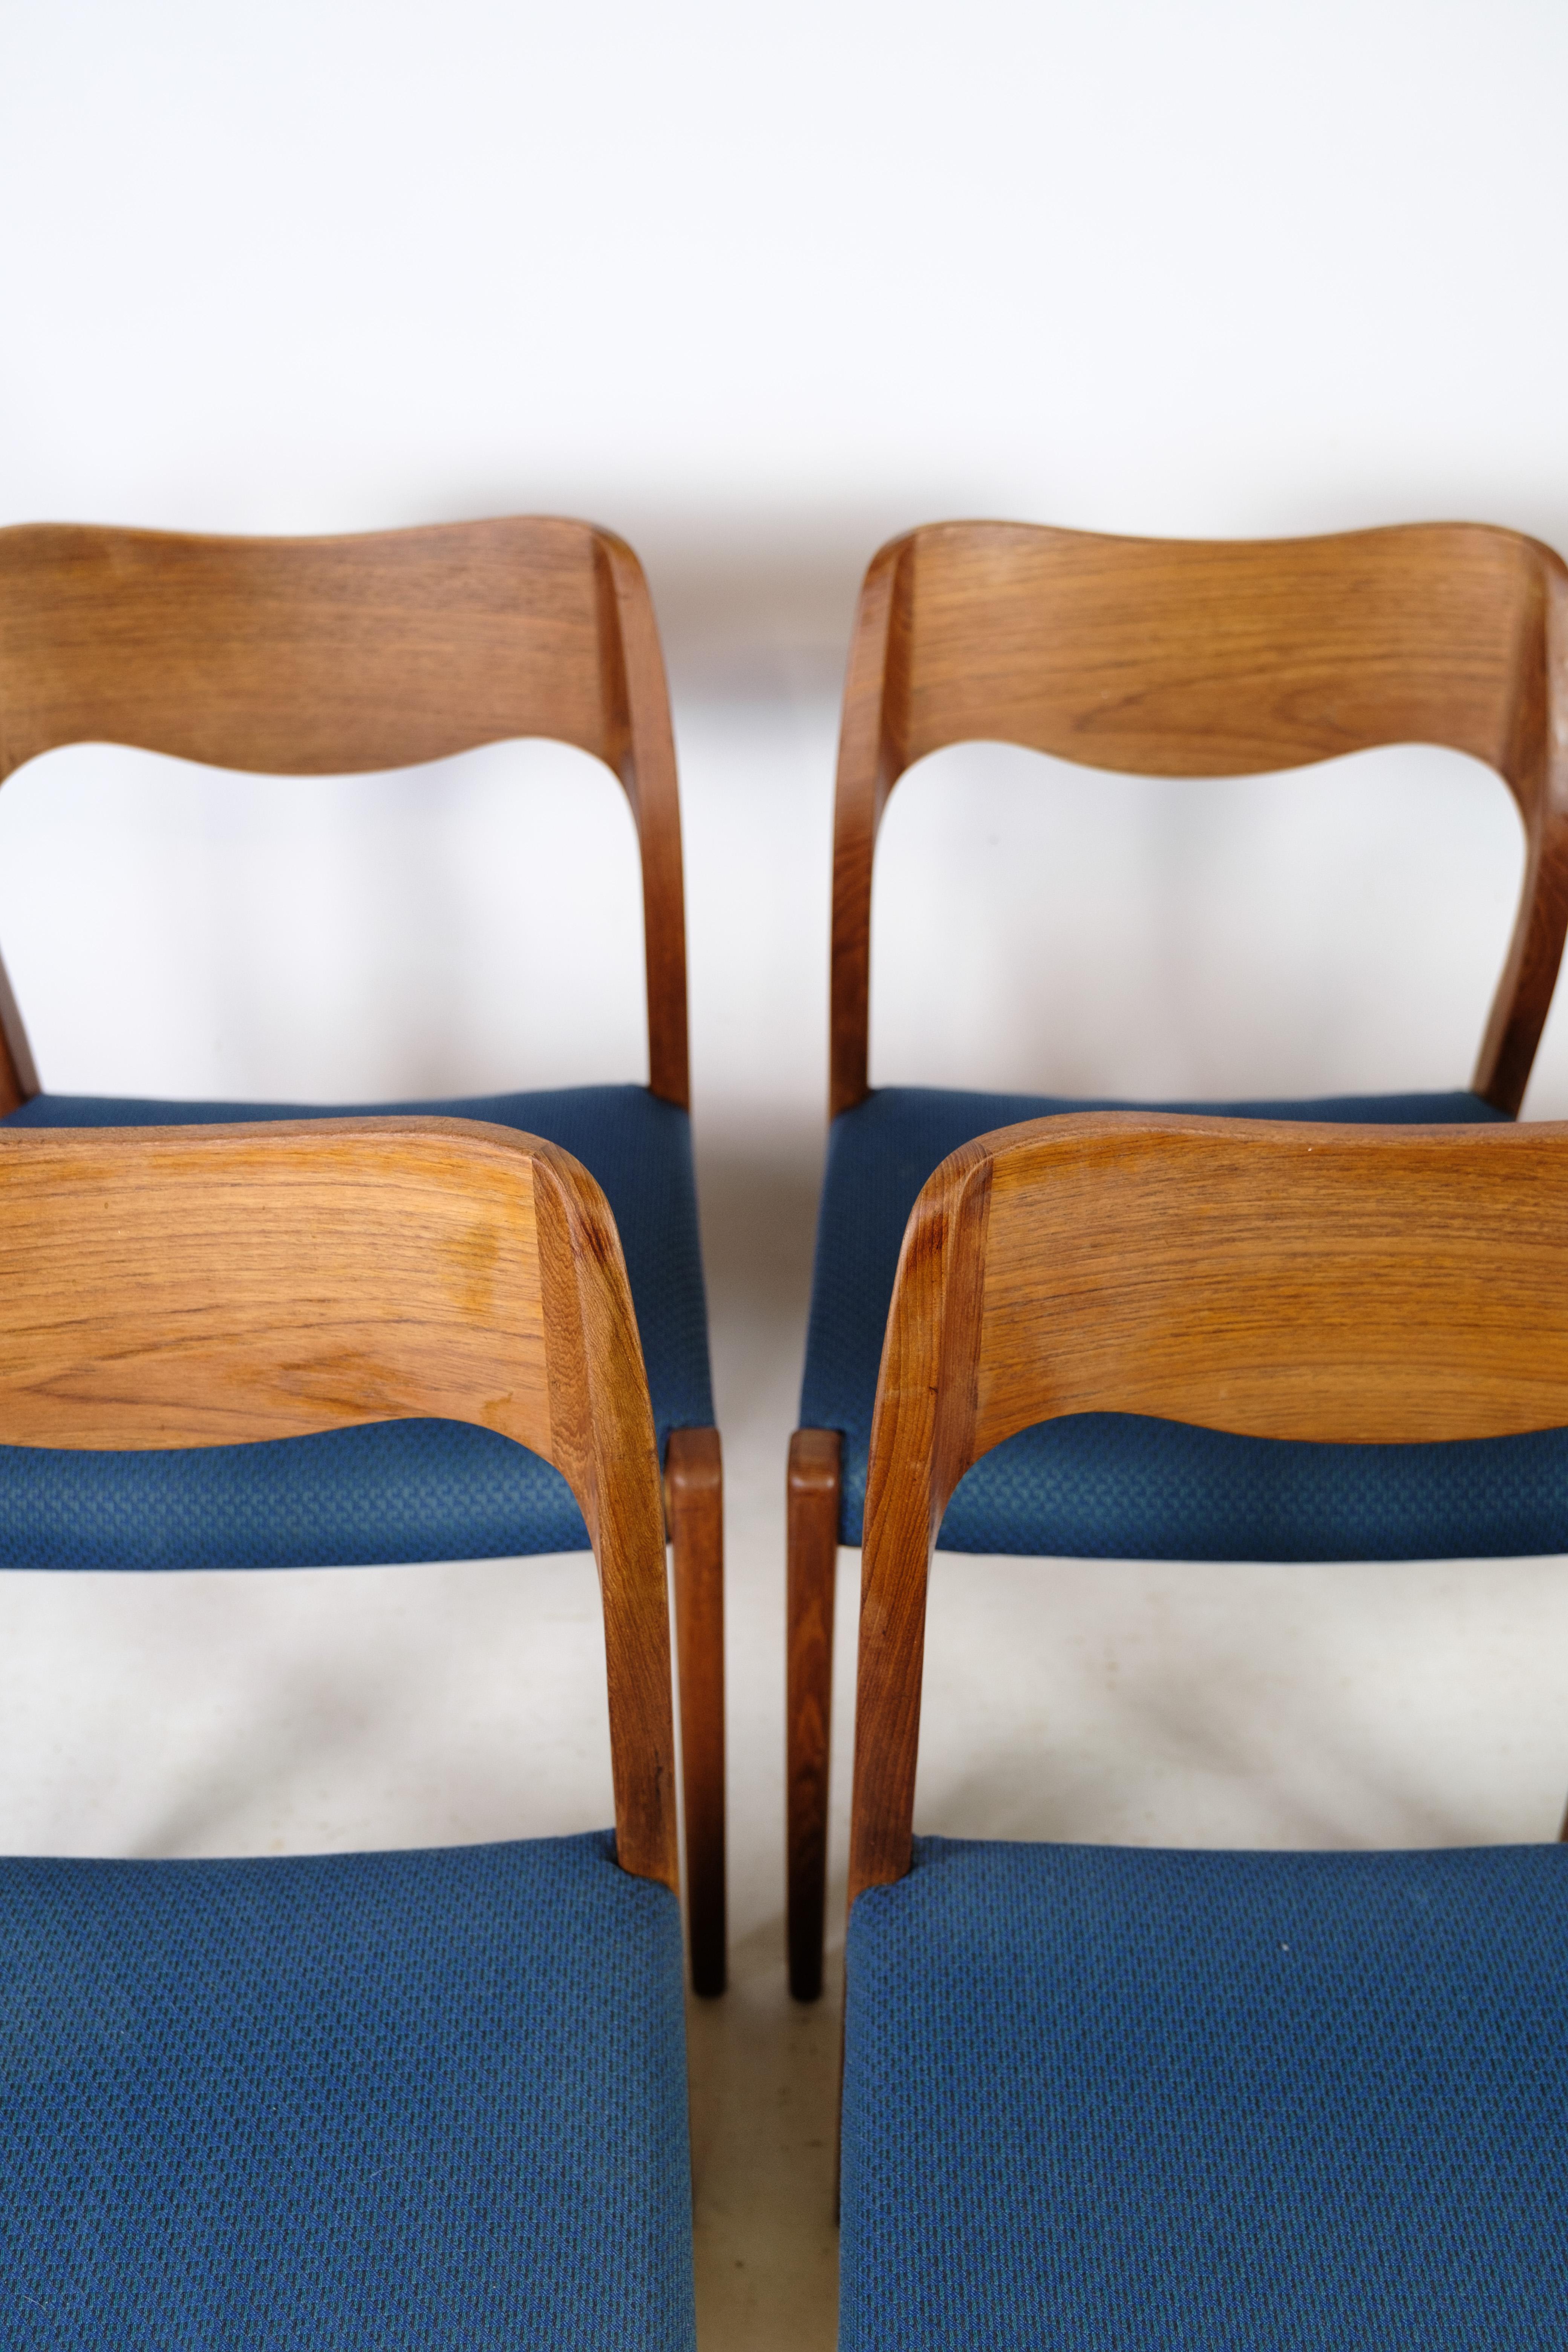 
This set of six dining chairs, known as Model 71, is a testament to the timeless design legacy of Niels O. Møller (1920-1982). Crafted from teak wood and manufactured by J.L. Møller's Møbelfabrik in the 1960s, these chairs exude the elegance and